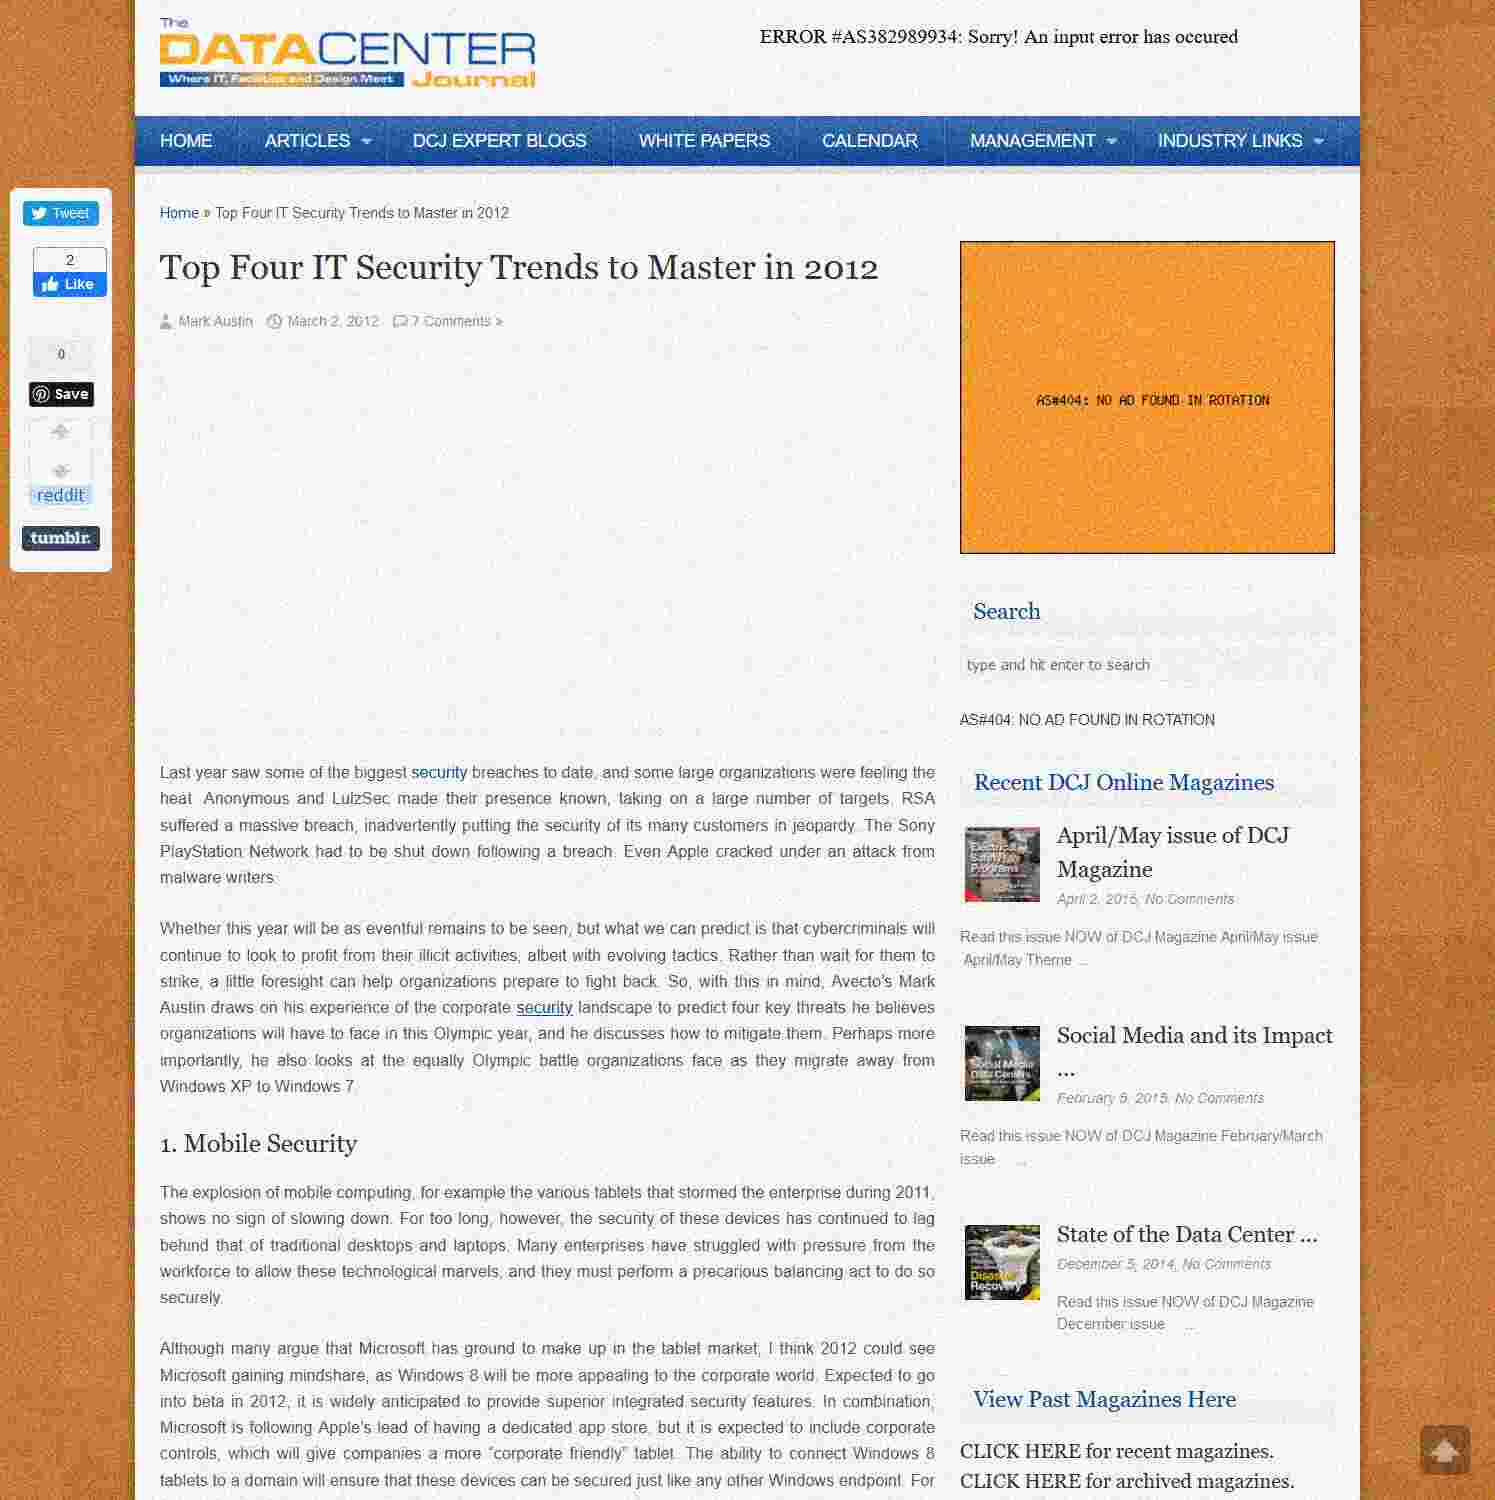 Illustration of Top Four IT Security Trends to Master in 2012